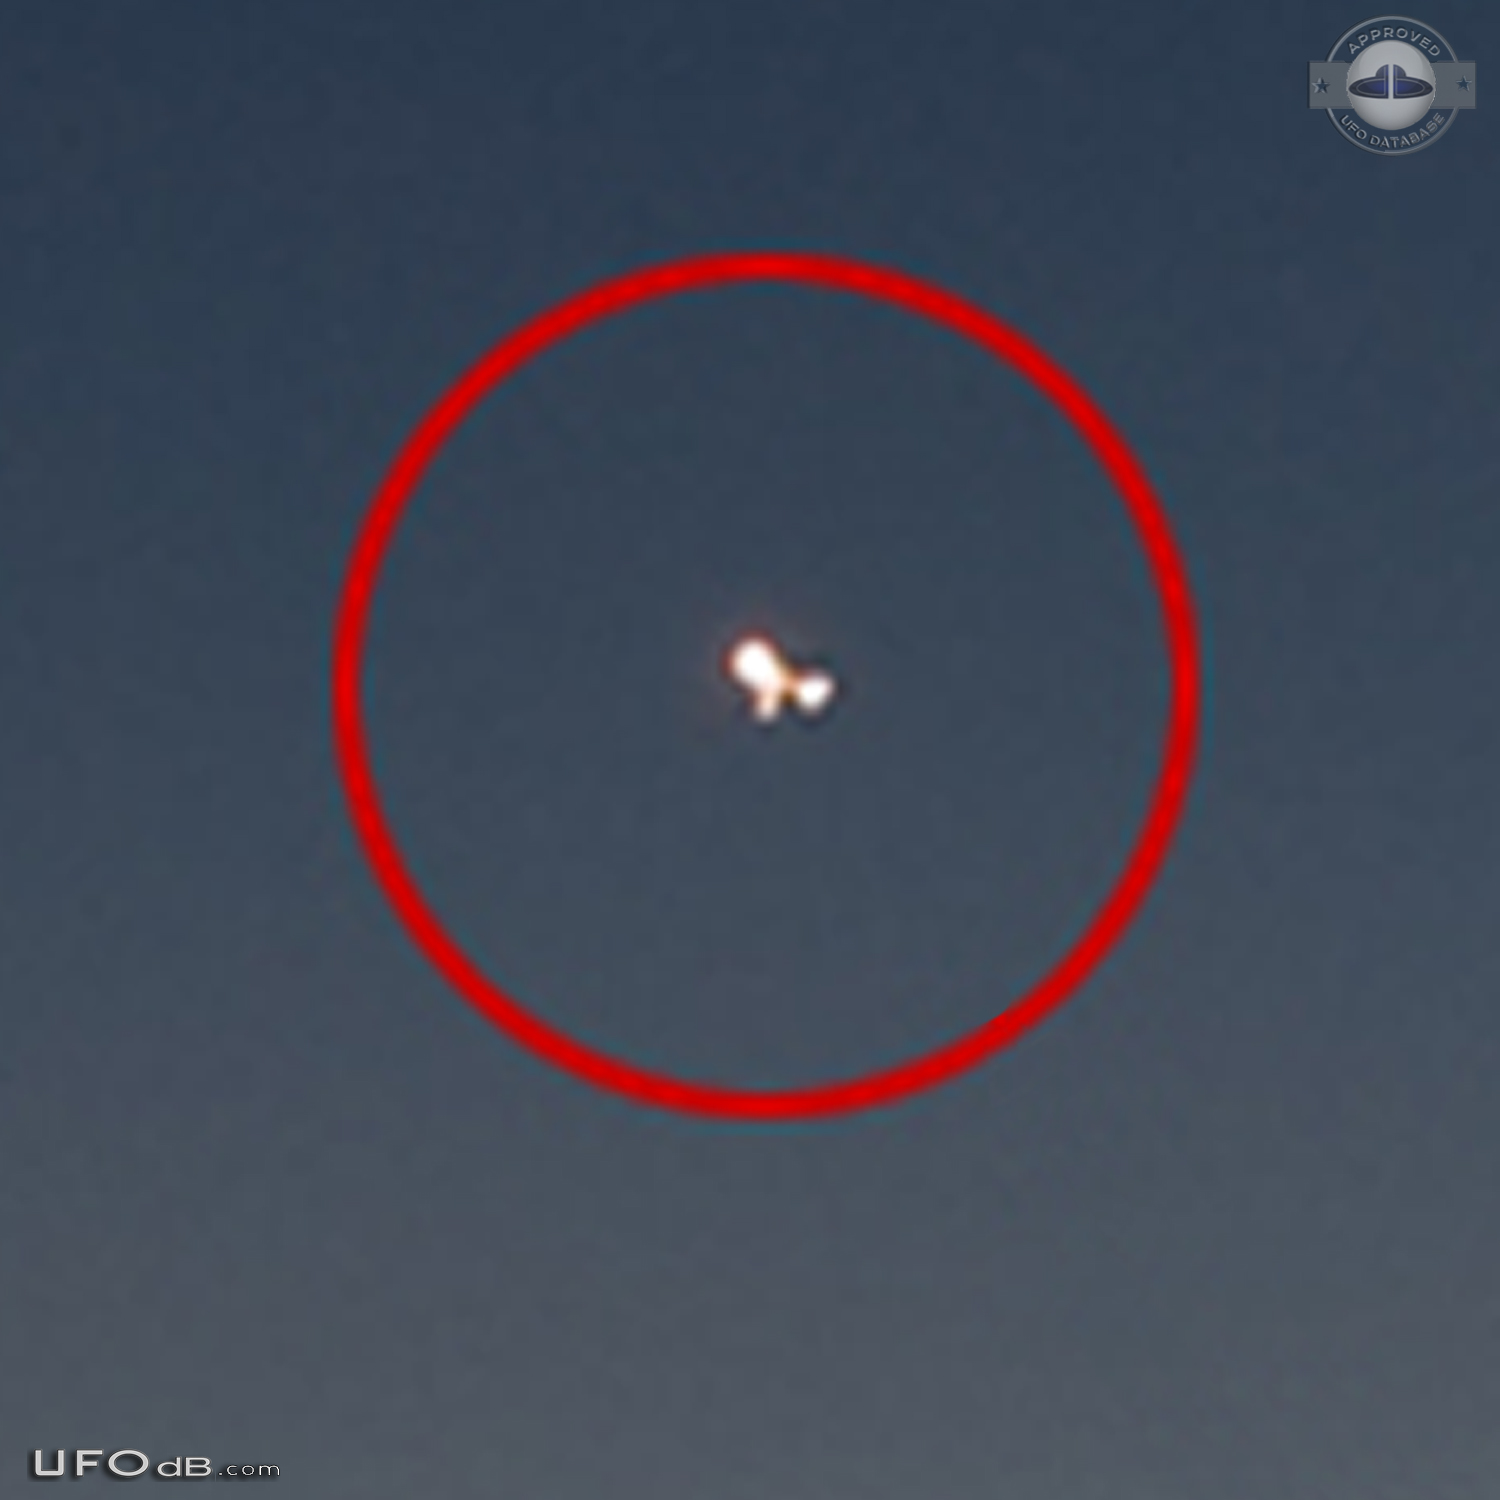 Mysterious Lights UFOS Observed Near Apsley Ontario Canada 2015 UFO Picture #721-8